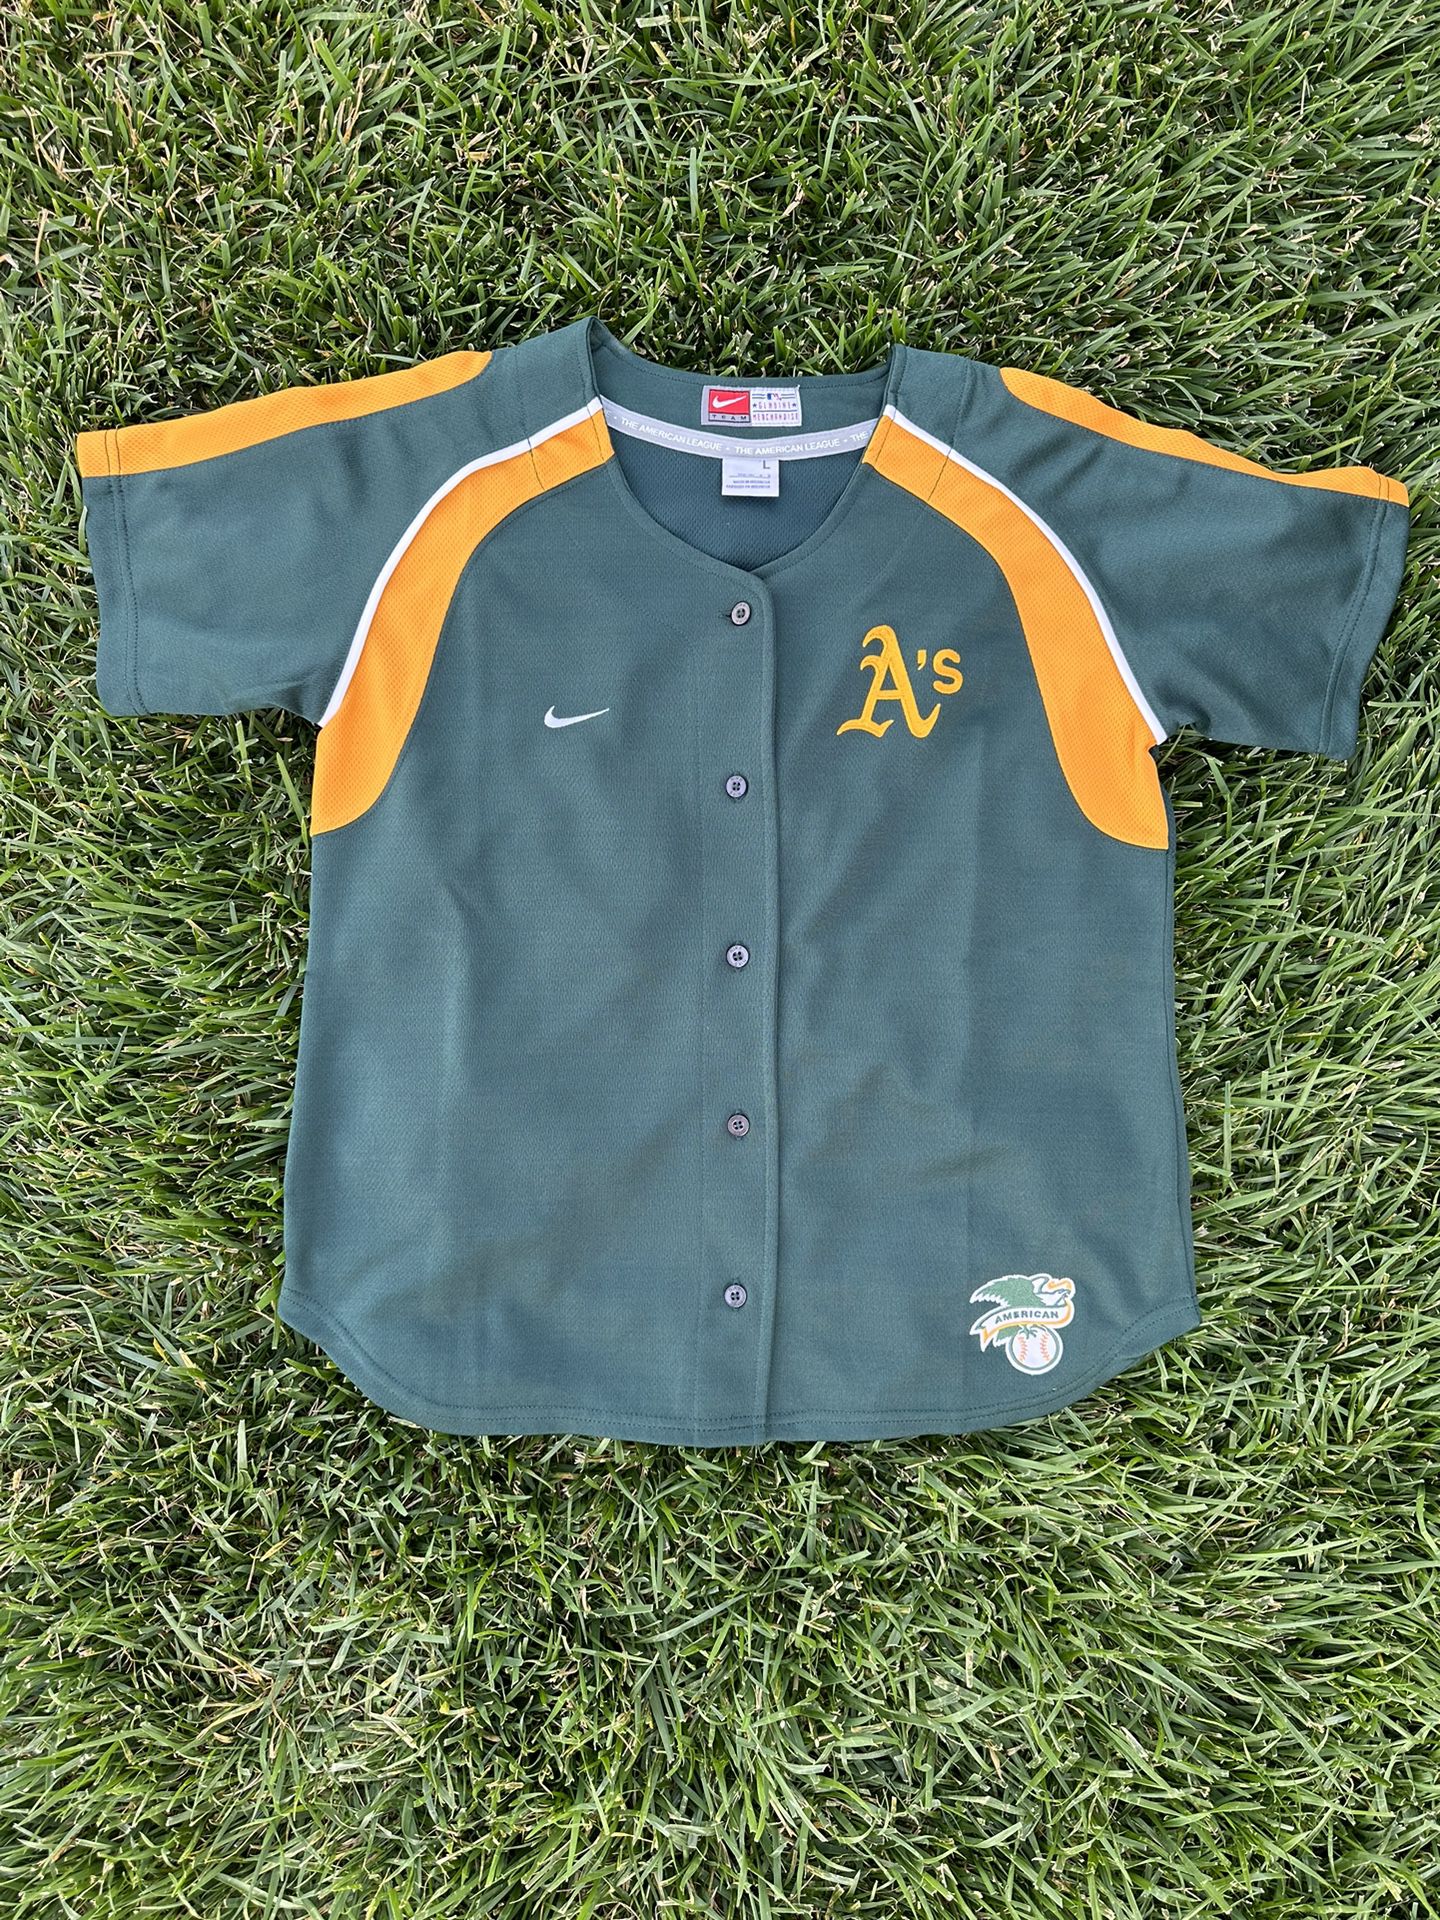 Vintage Nike MLB Oakland A's Jersey Wmns szL for Sale in Vallejo